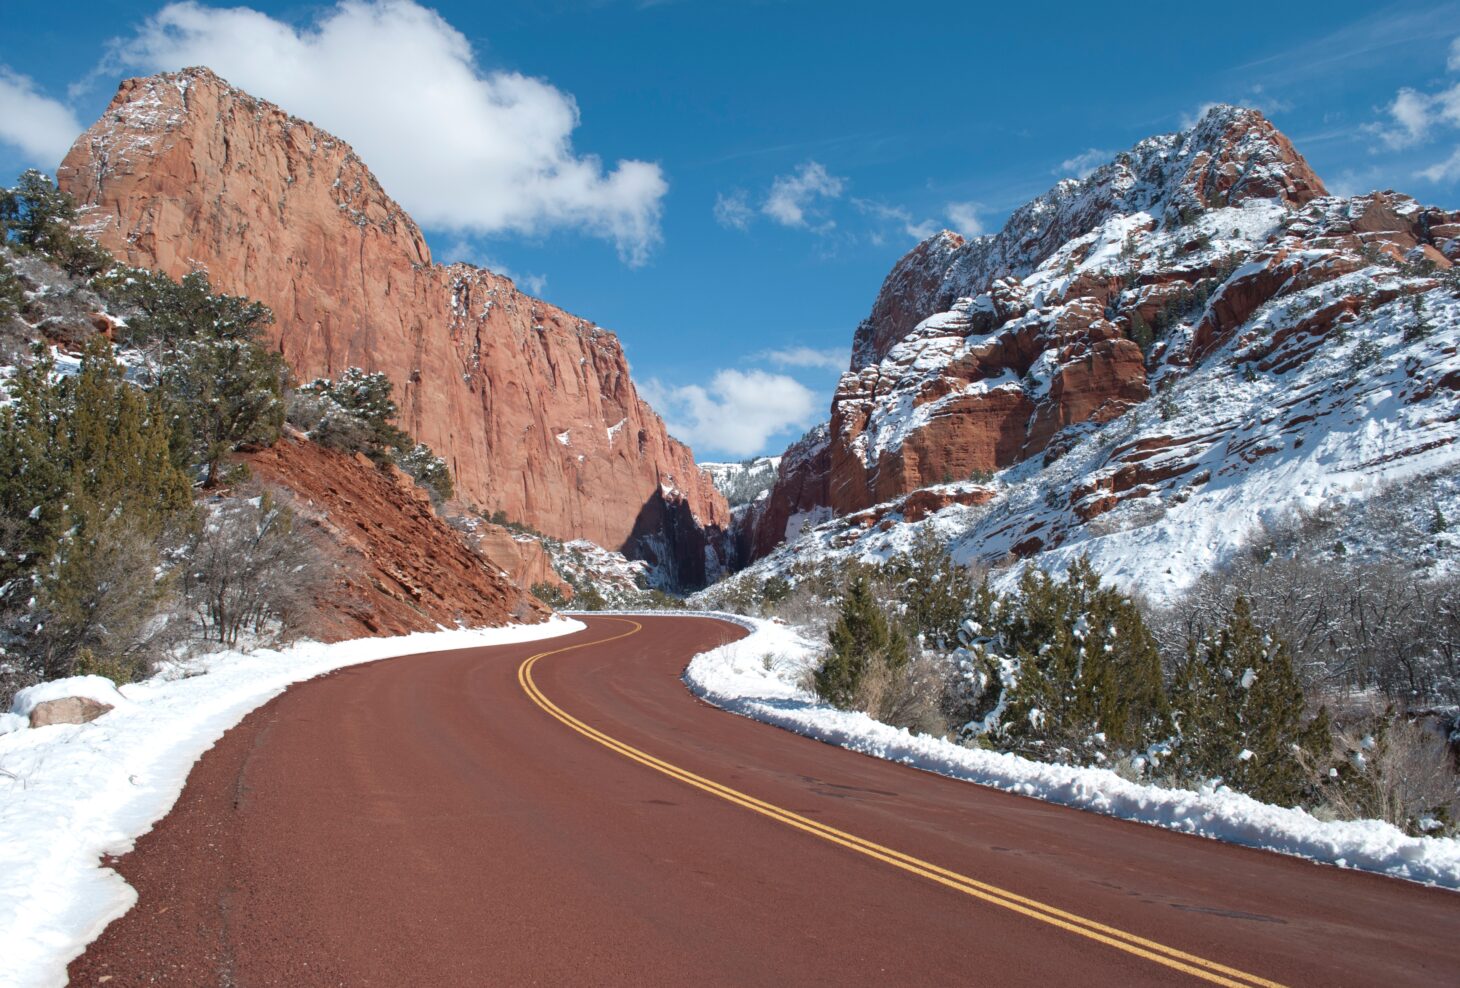 Snow on the side of the roadway at Zion National Park